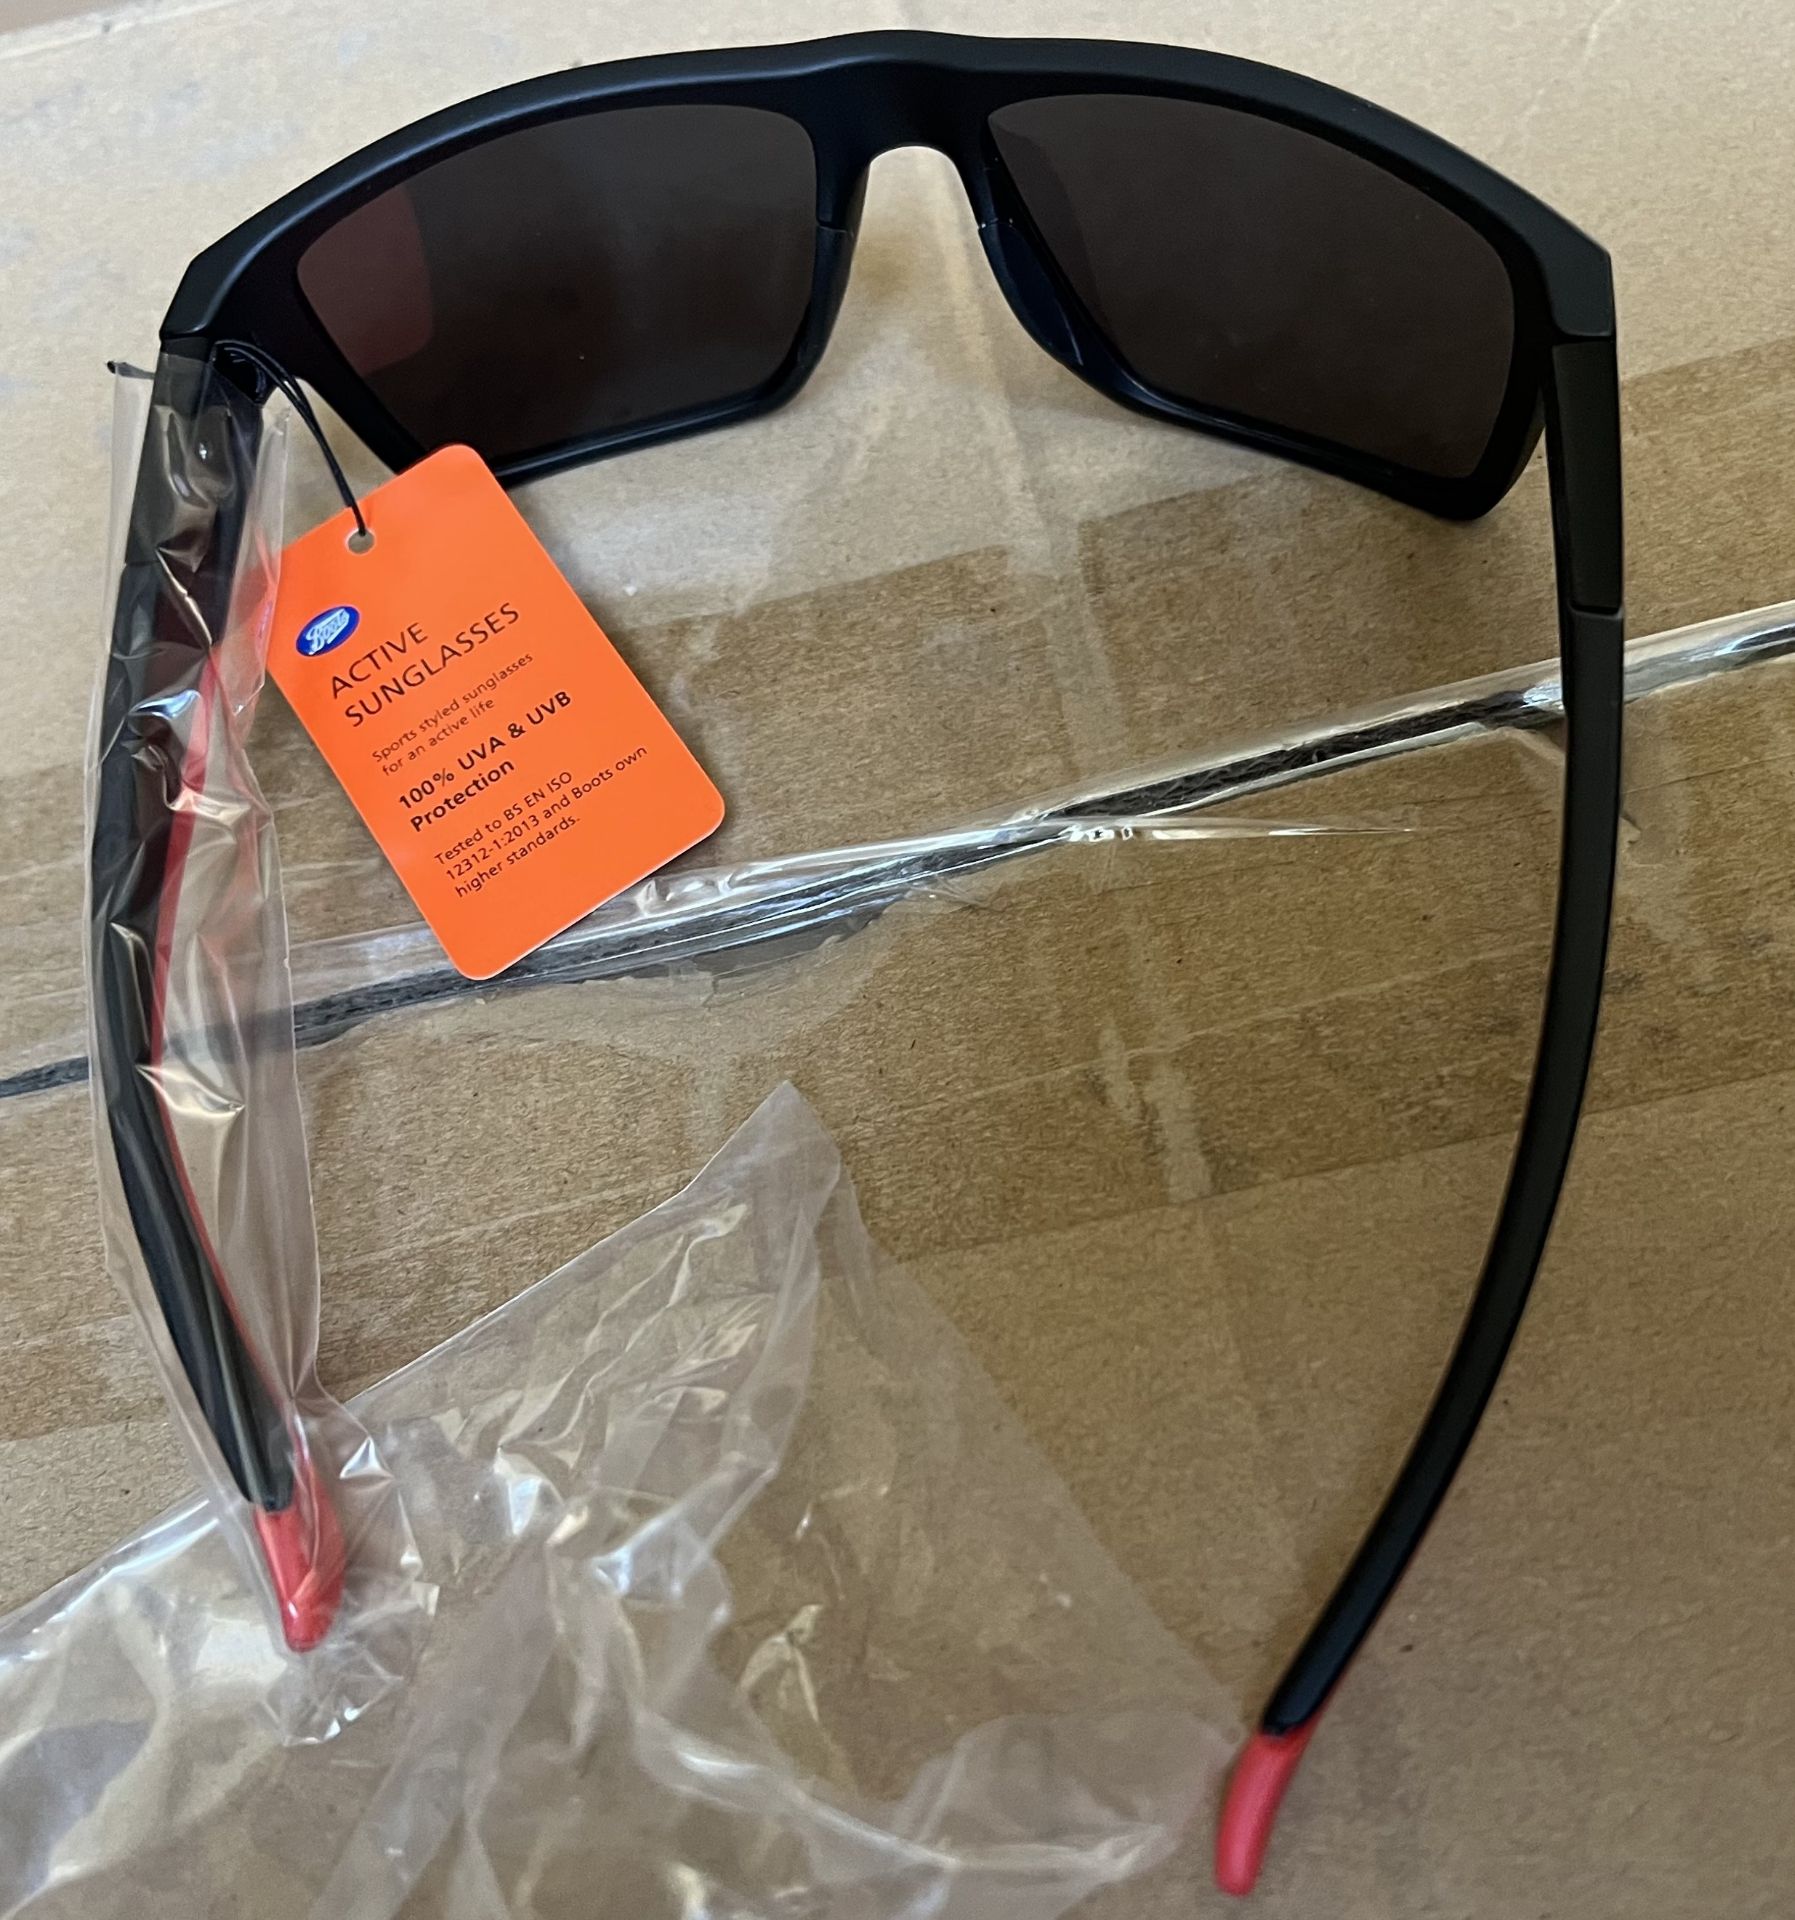 40 x Boots Active Sports Styled Sunglasses 100% UVA - (NEW) - BOOTS RRP Â£1,000 ! - Image 3 of 3